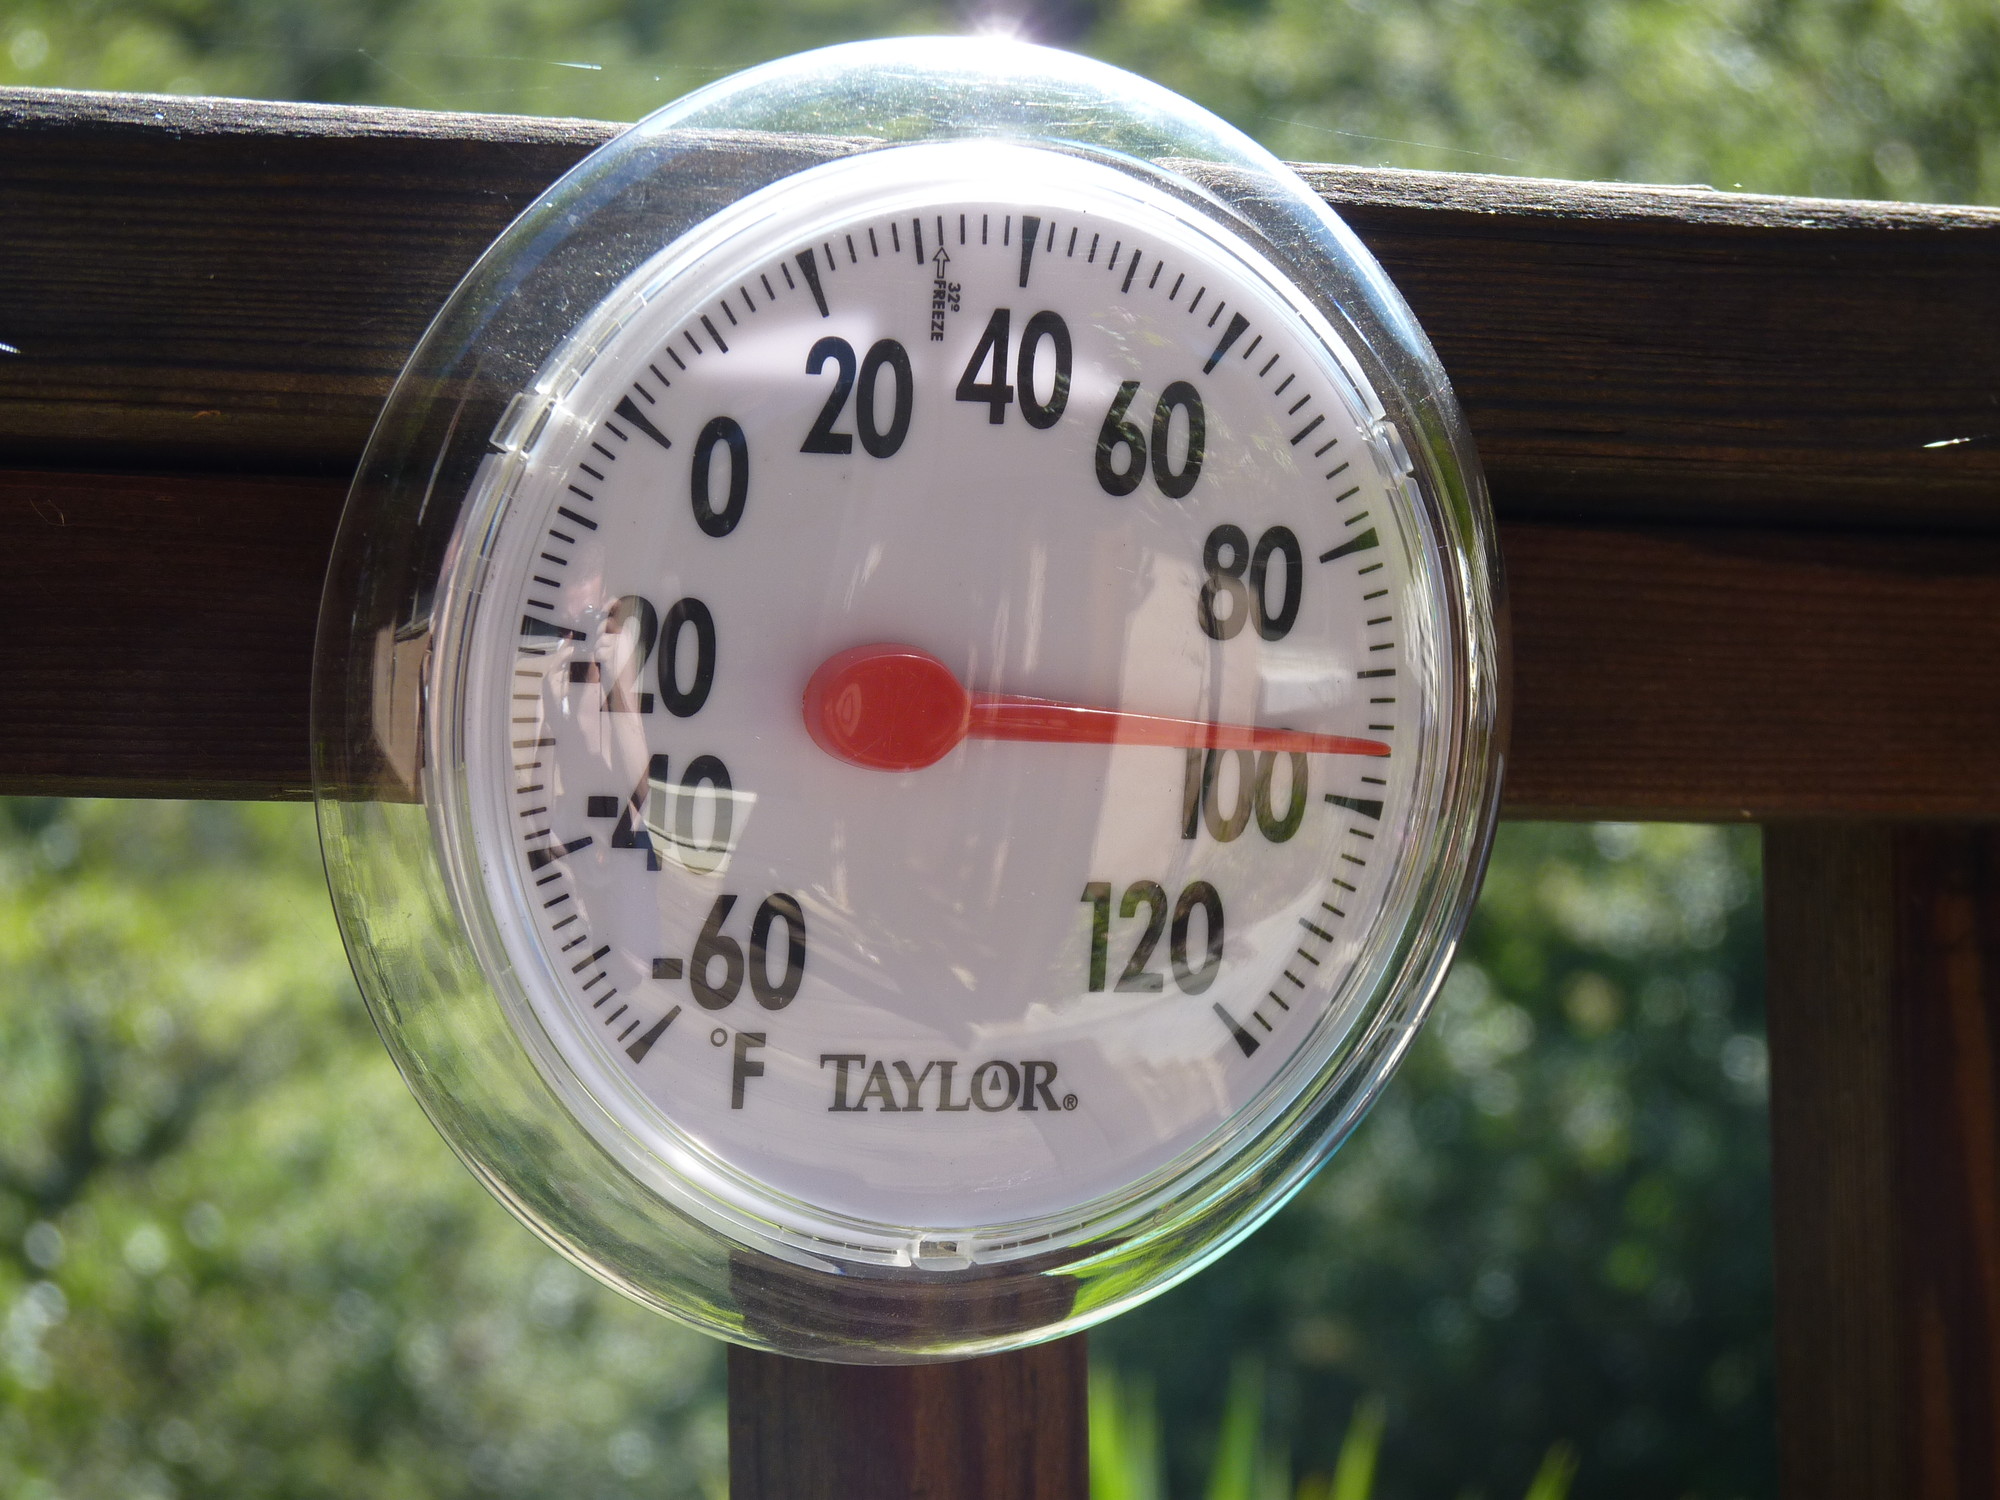 2014 set temperature records throughout much of the West. (Craig Miller/KQED)